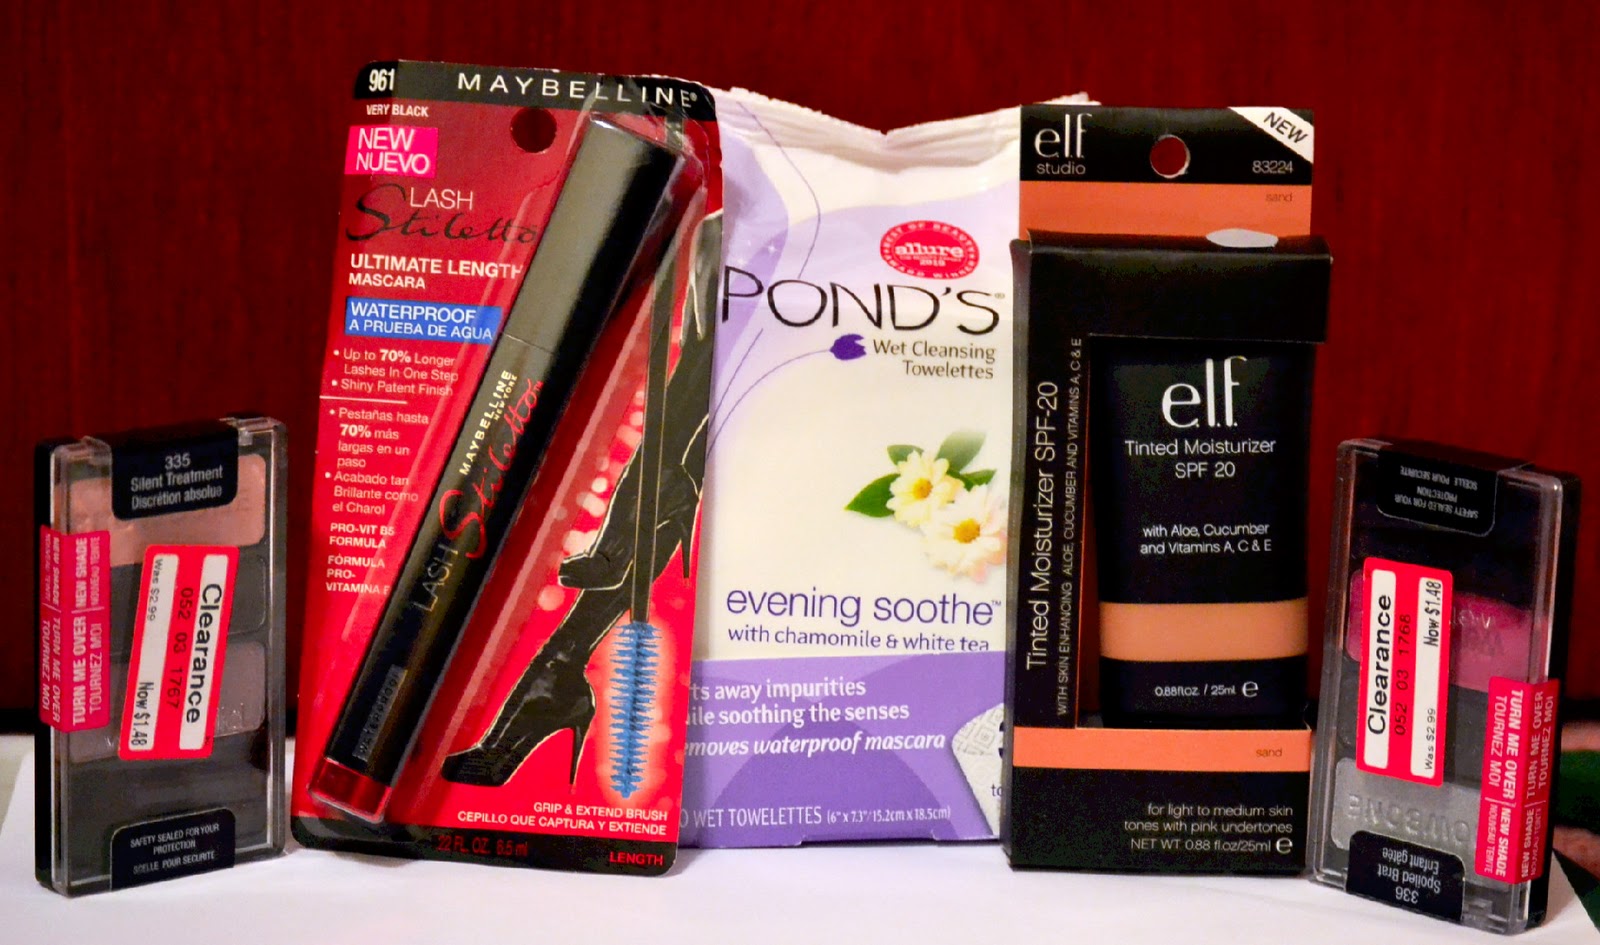 TheVEROblog: Mini Target Haul (includes details on clearance items!)